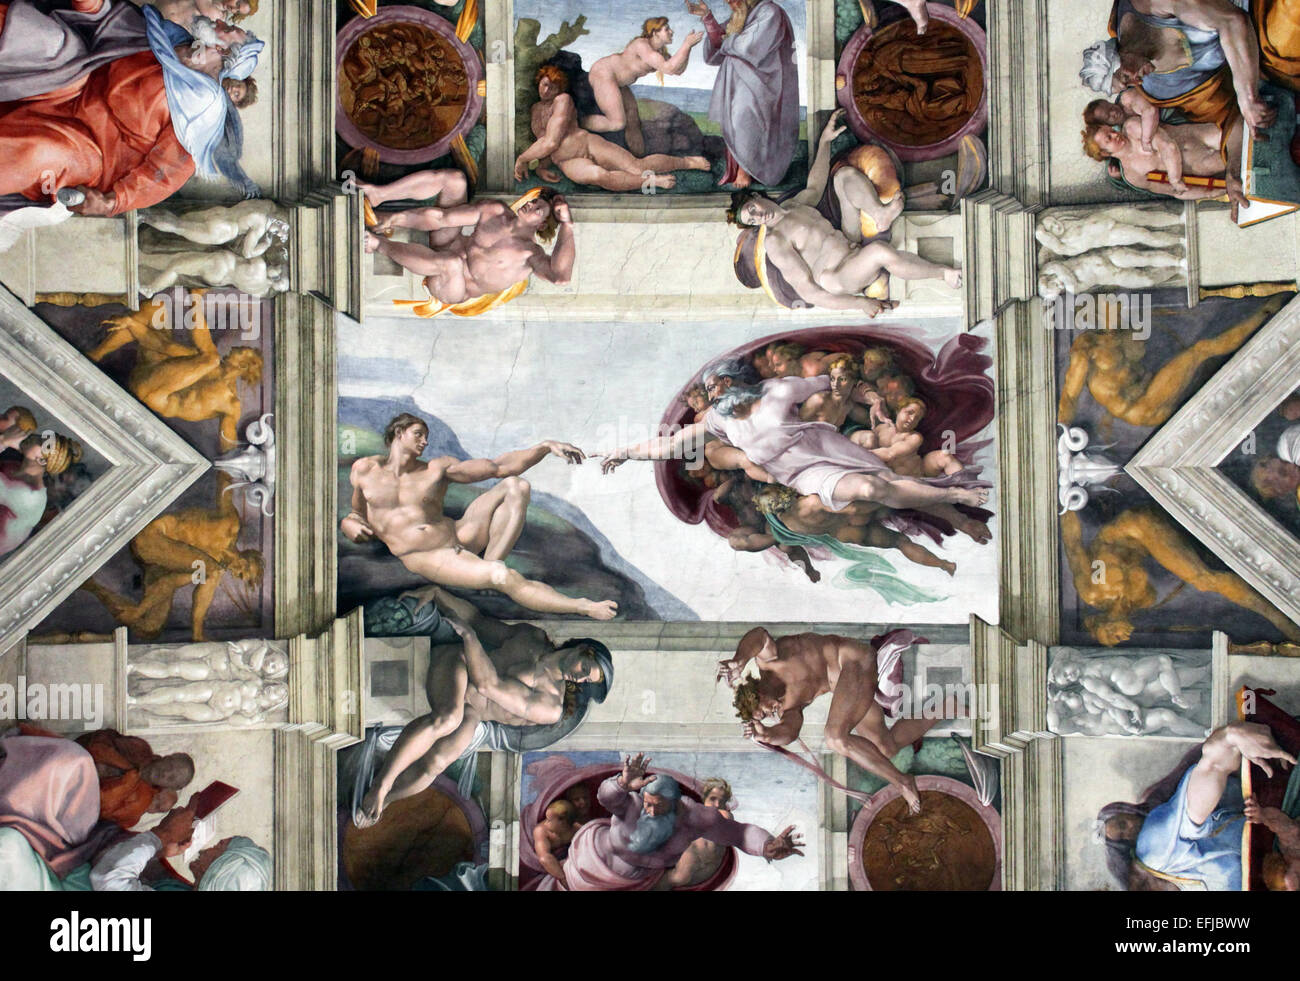 VATICAN - MAY 30, 2014: the Sistine Chapel ceiling, painted by Michelangelo on May 30, 2014 in Vatican. Stock Photo